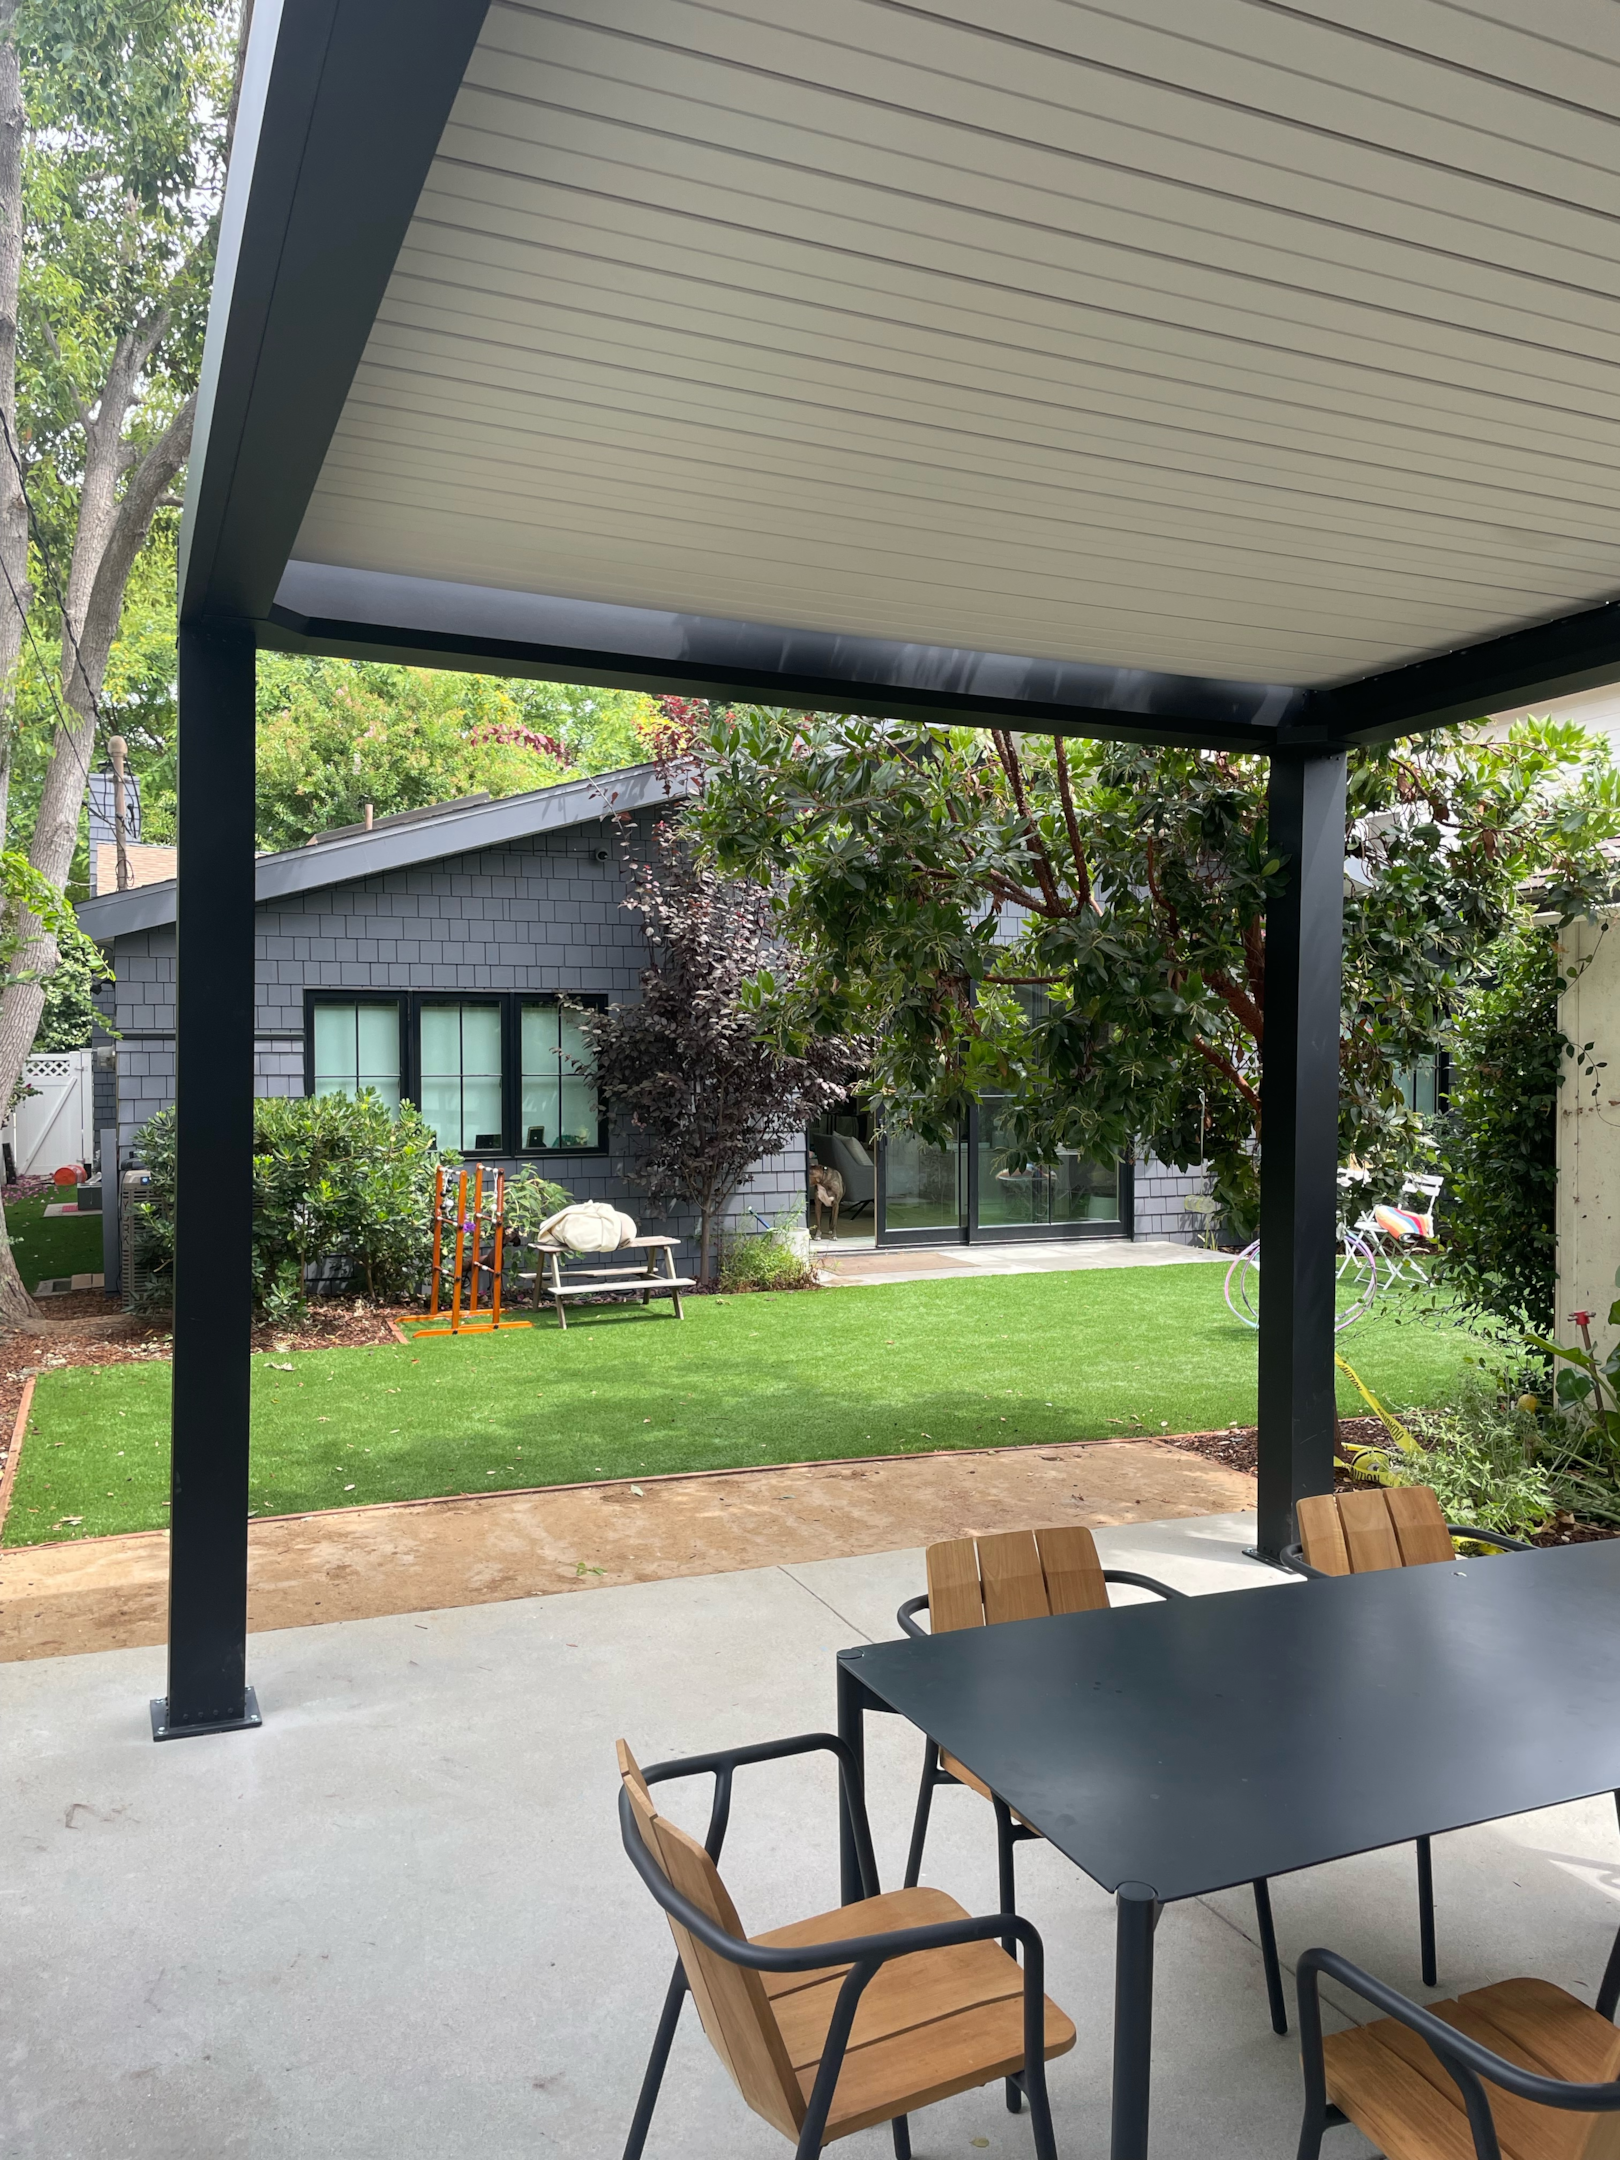 Hot Summer days and strong winds in your area?  Control your outdoor living space with a louvered roof.